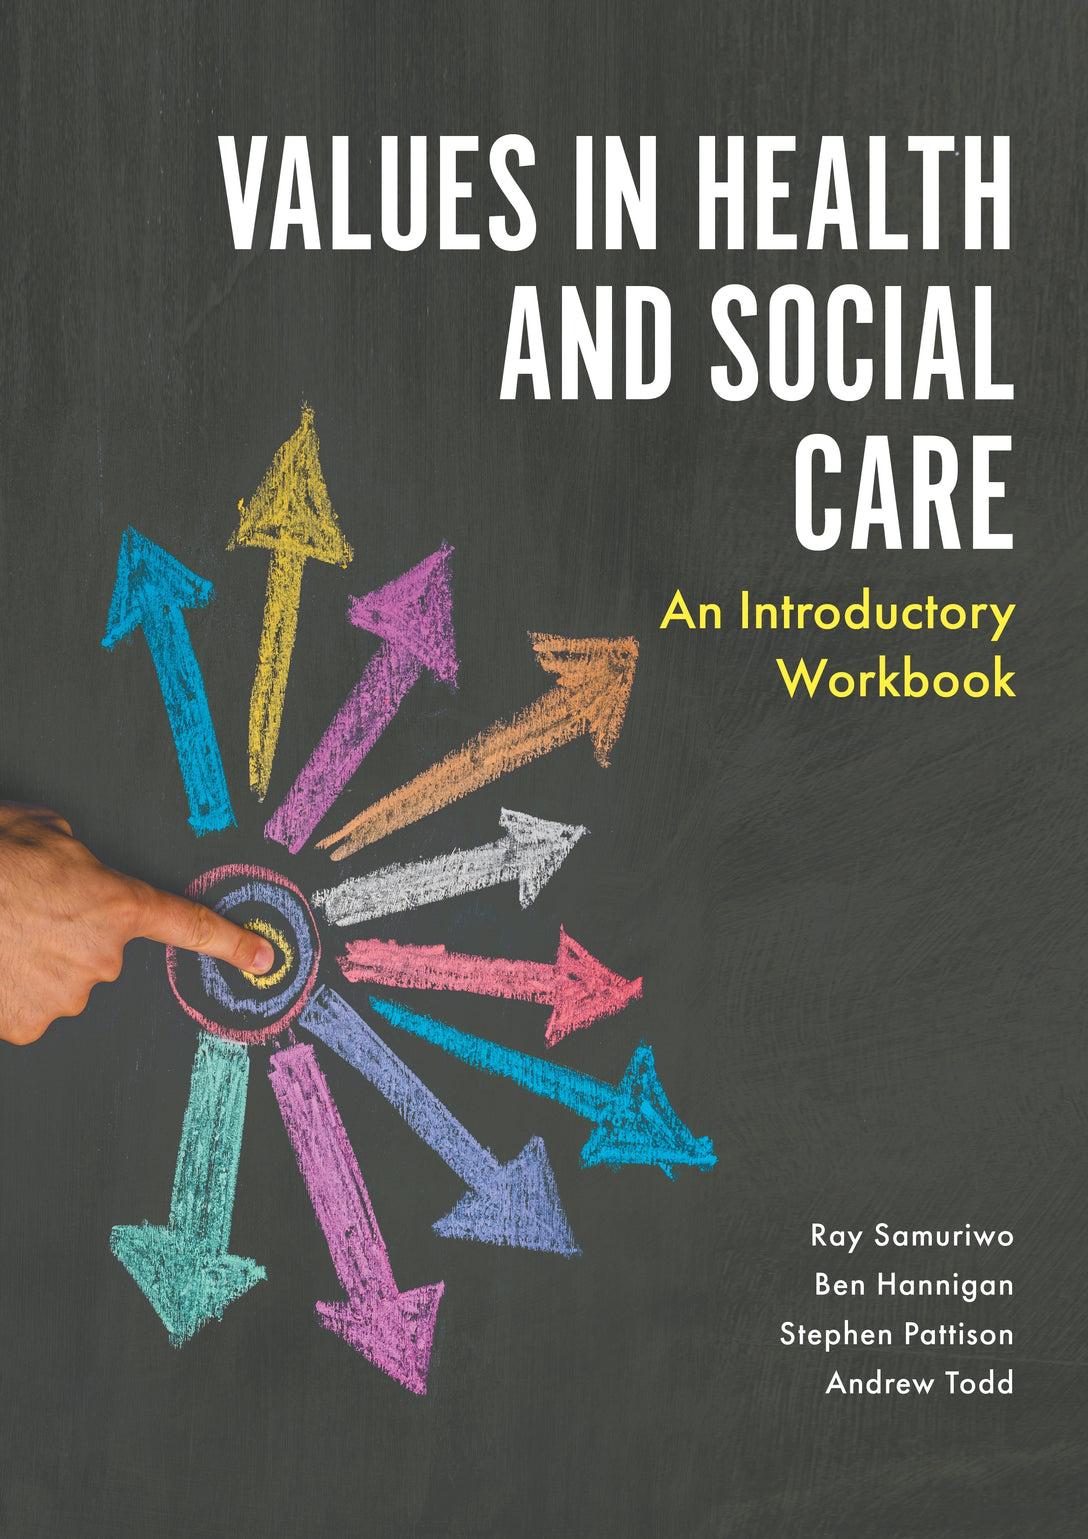 Values in Health and Social Care by Ray Samuriwo, Stephen Pattison, Andrew Todd, Ben Hannigan